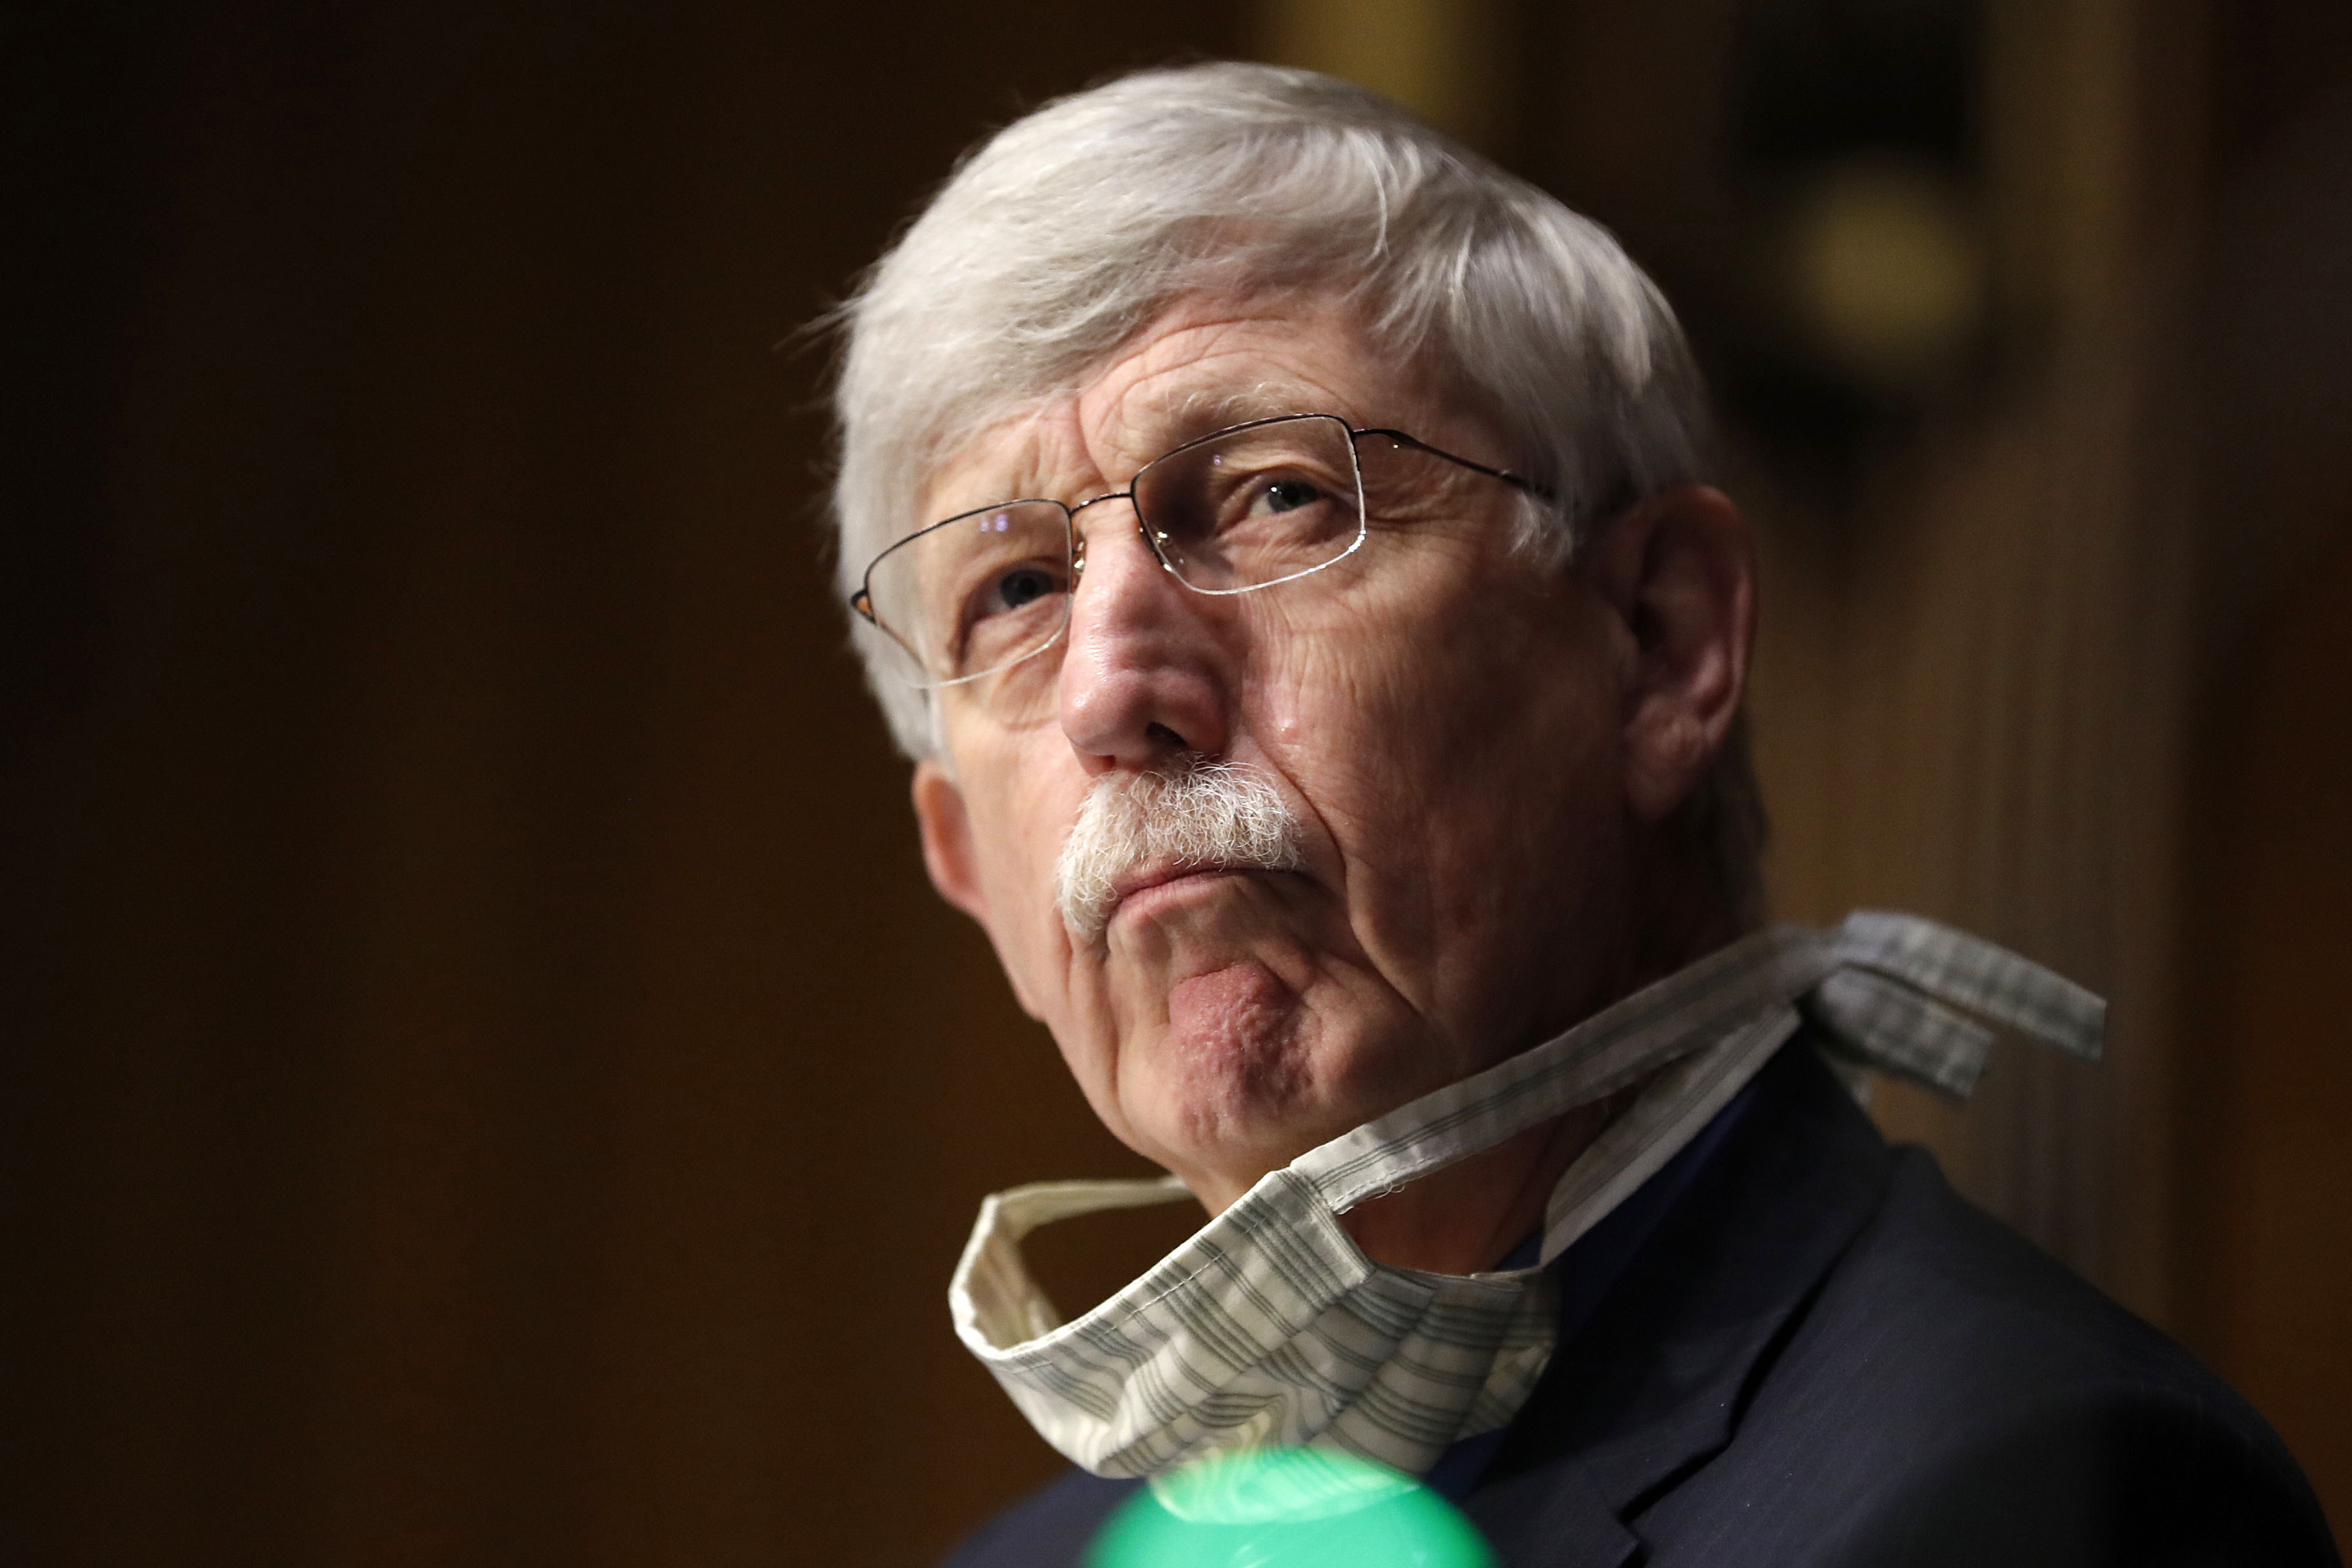 Dr. Francis Collins, director of the National Institutes of Health (NIH), listens during a hearing in Washington, DC, on May 7.